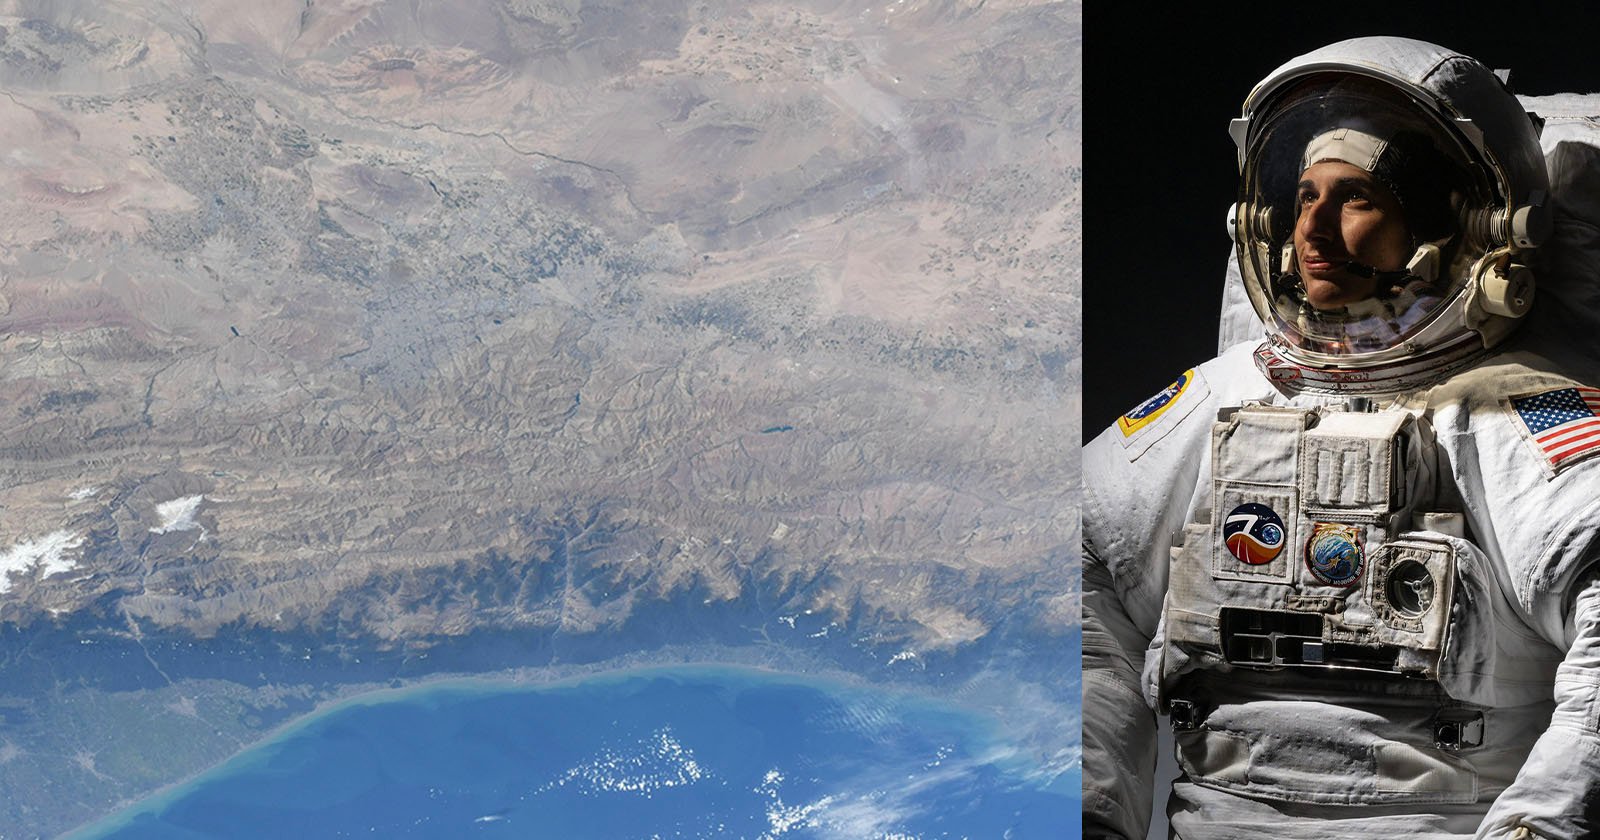 Astronaut With Persian Roots Takes Photos of Iran From Space: This May Be The Closest I Will Ever Get